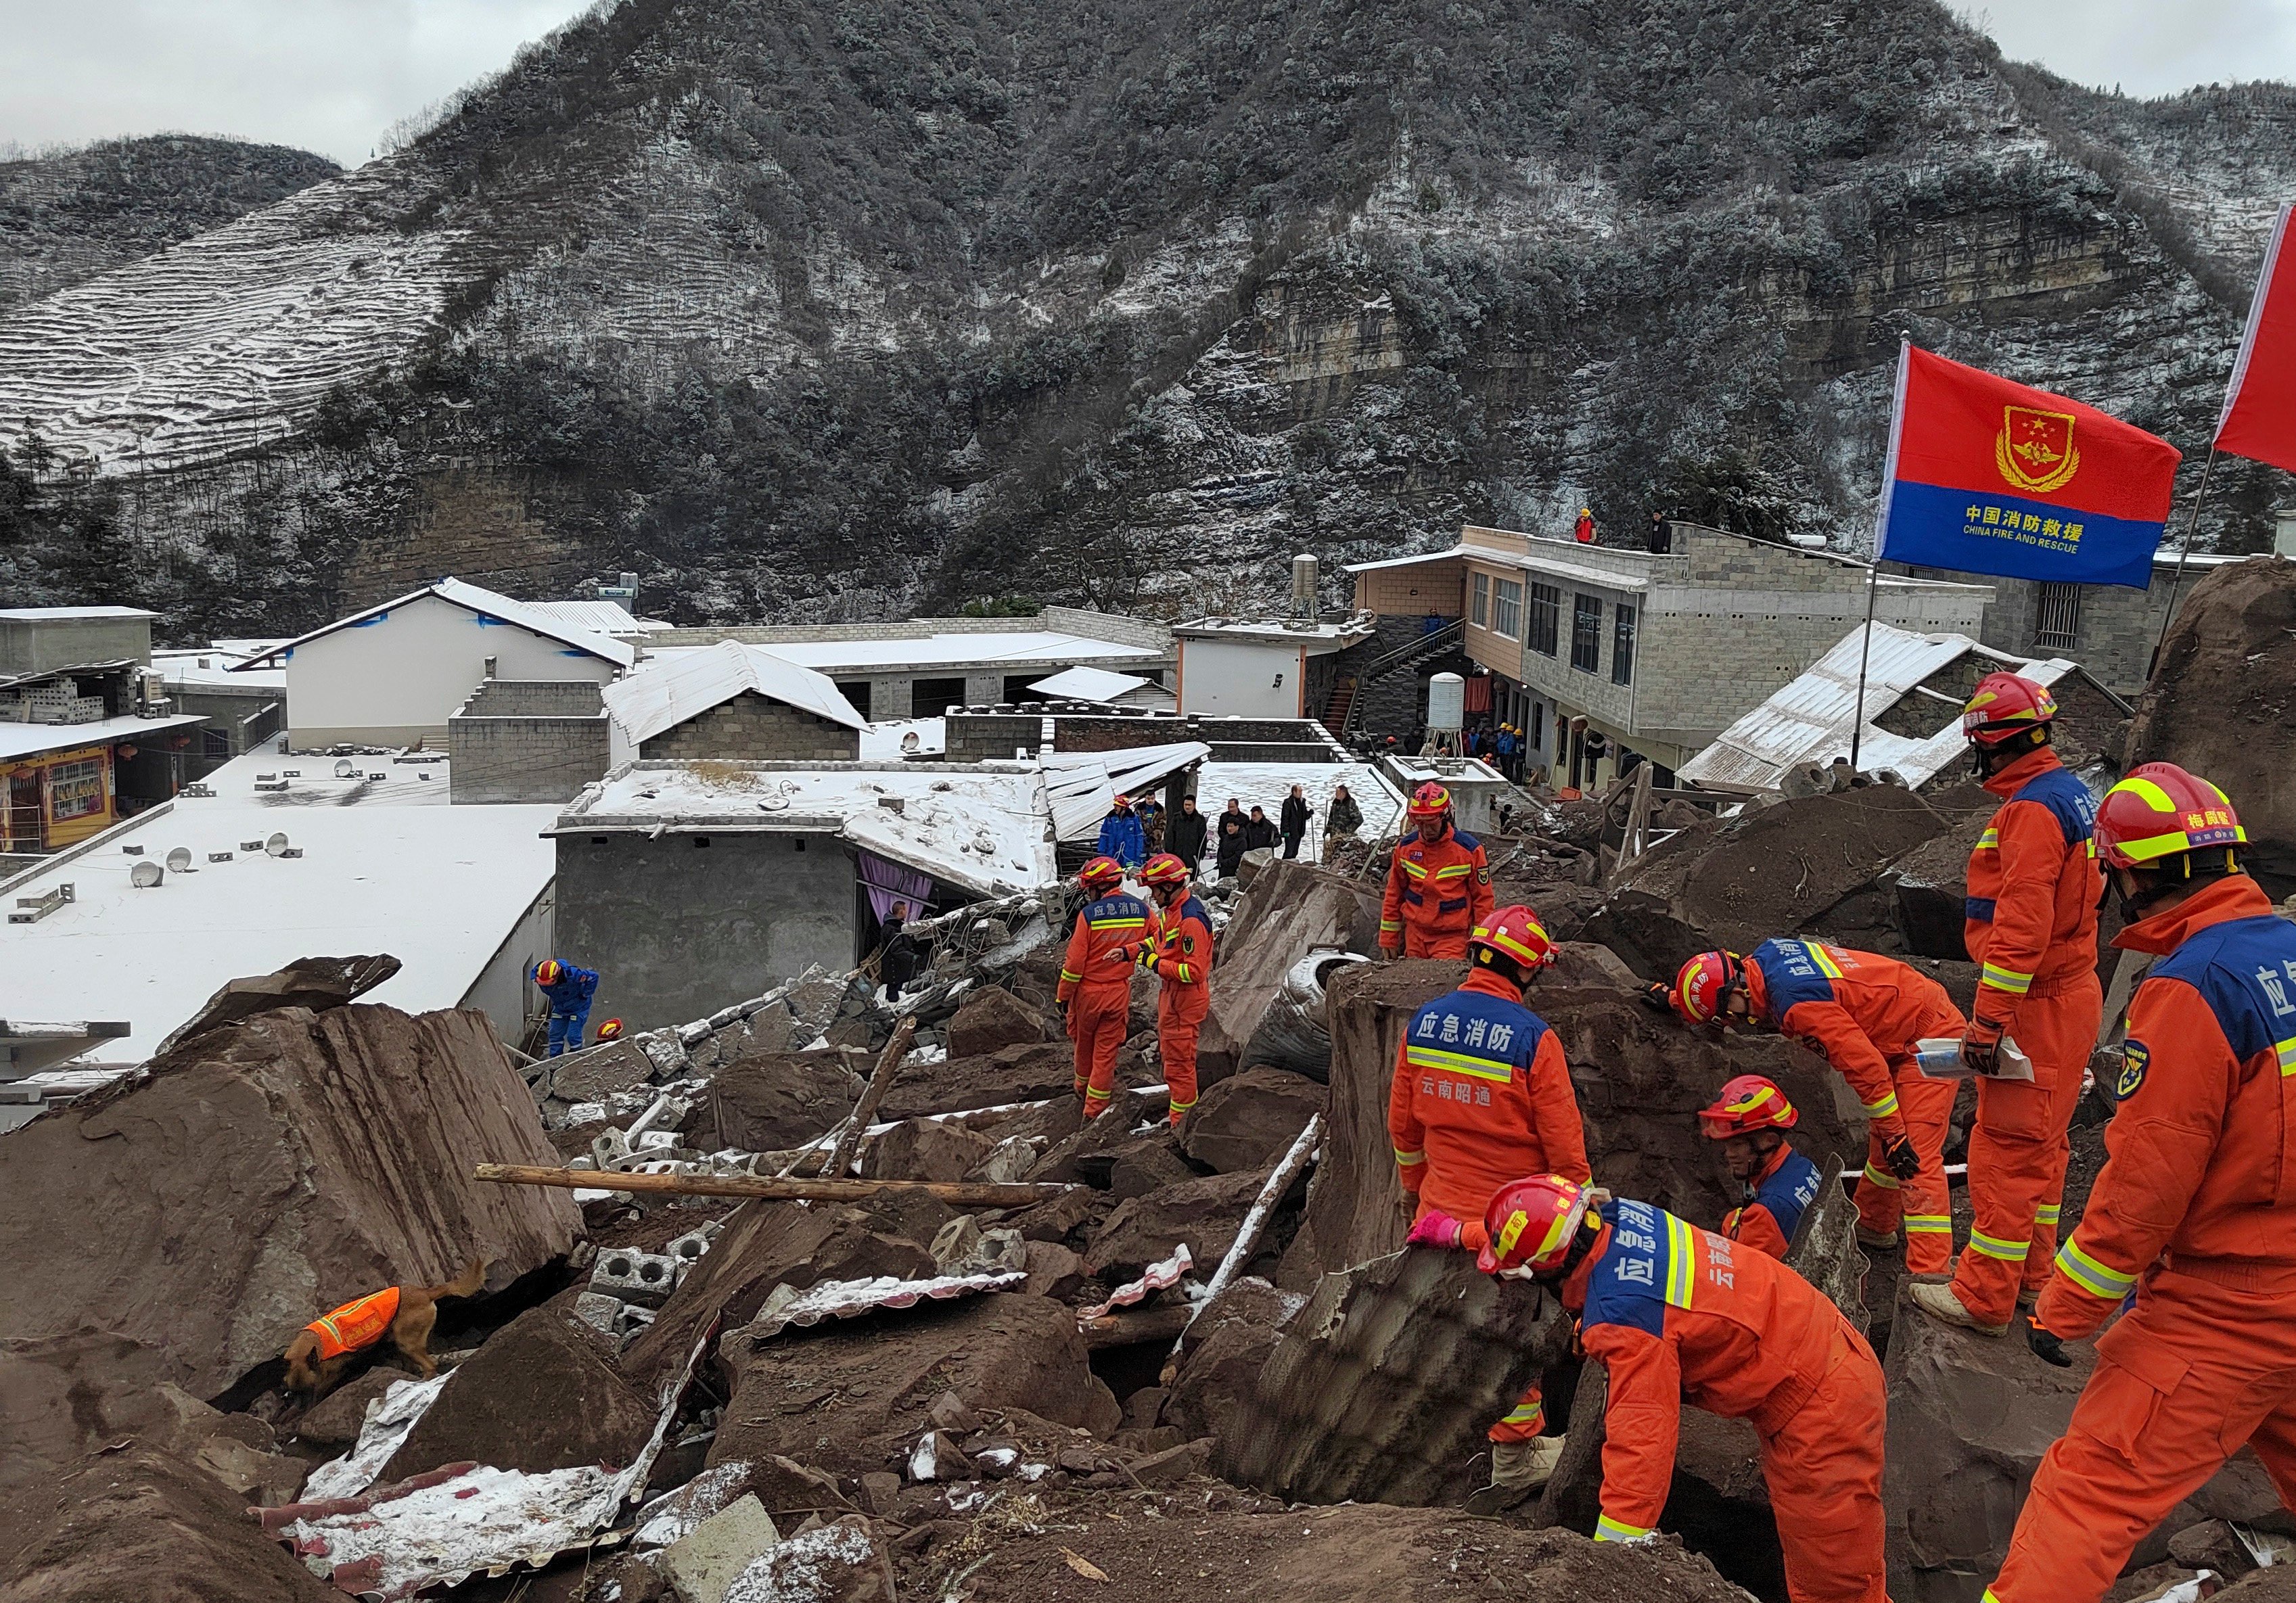 Rescuers look for victims of a landslide that struck the village of Liangshui in southwest Yunnan province on Monday. Photo: Xinhua